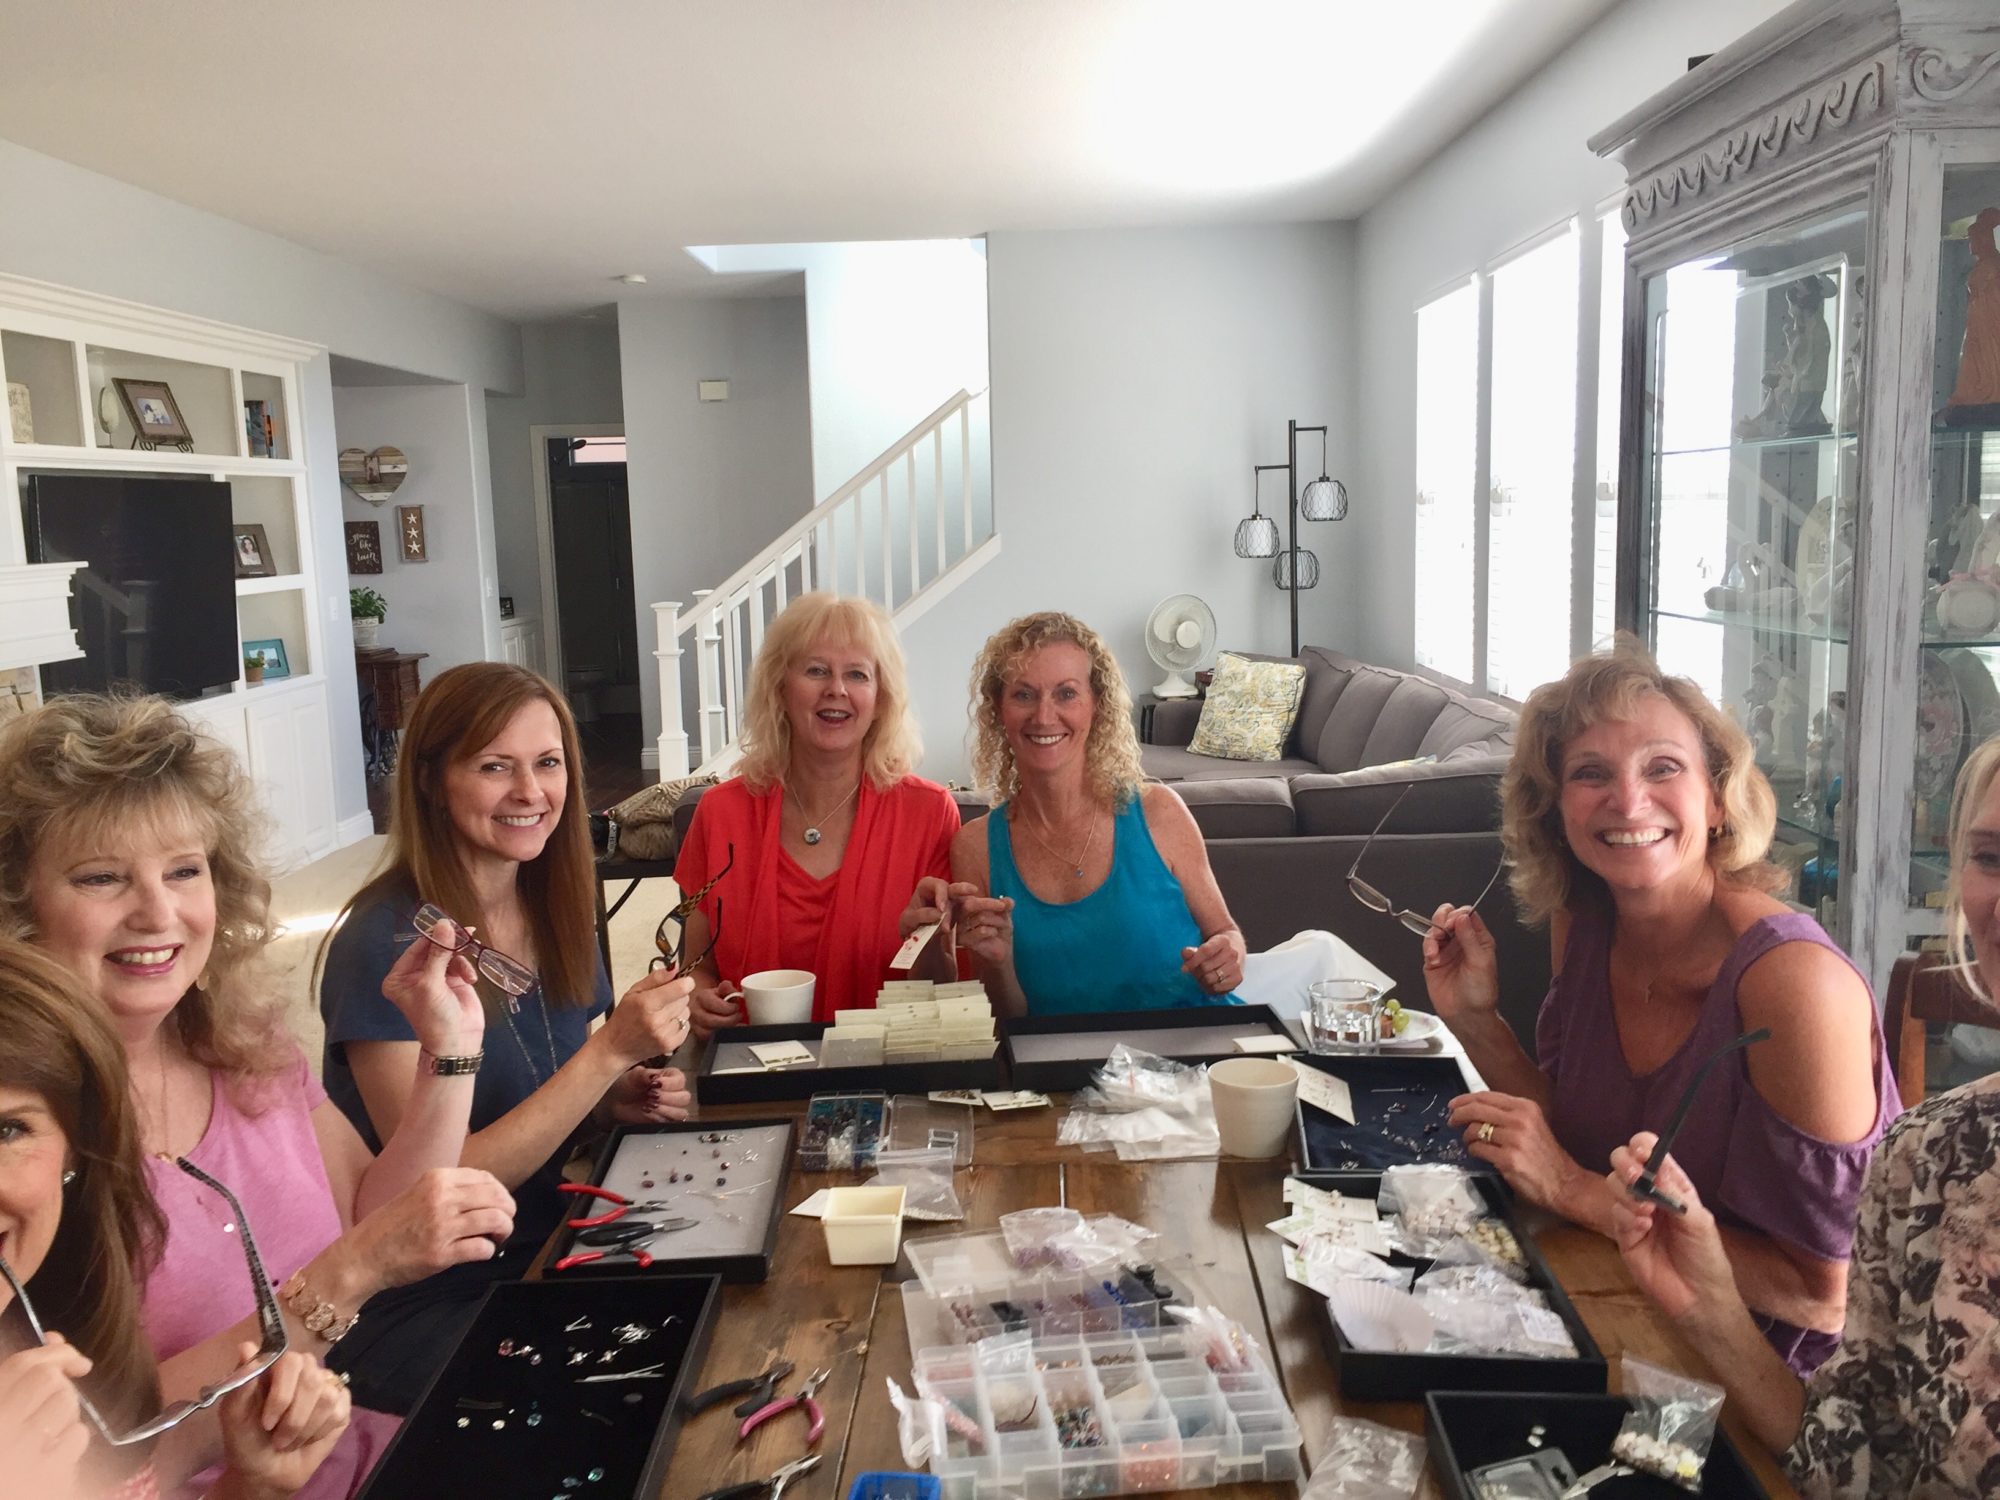 Jewelry Making to Support Adoption - Home for Good Foundation - Monday PM